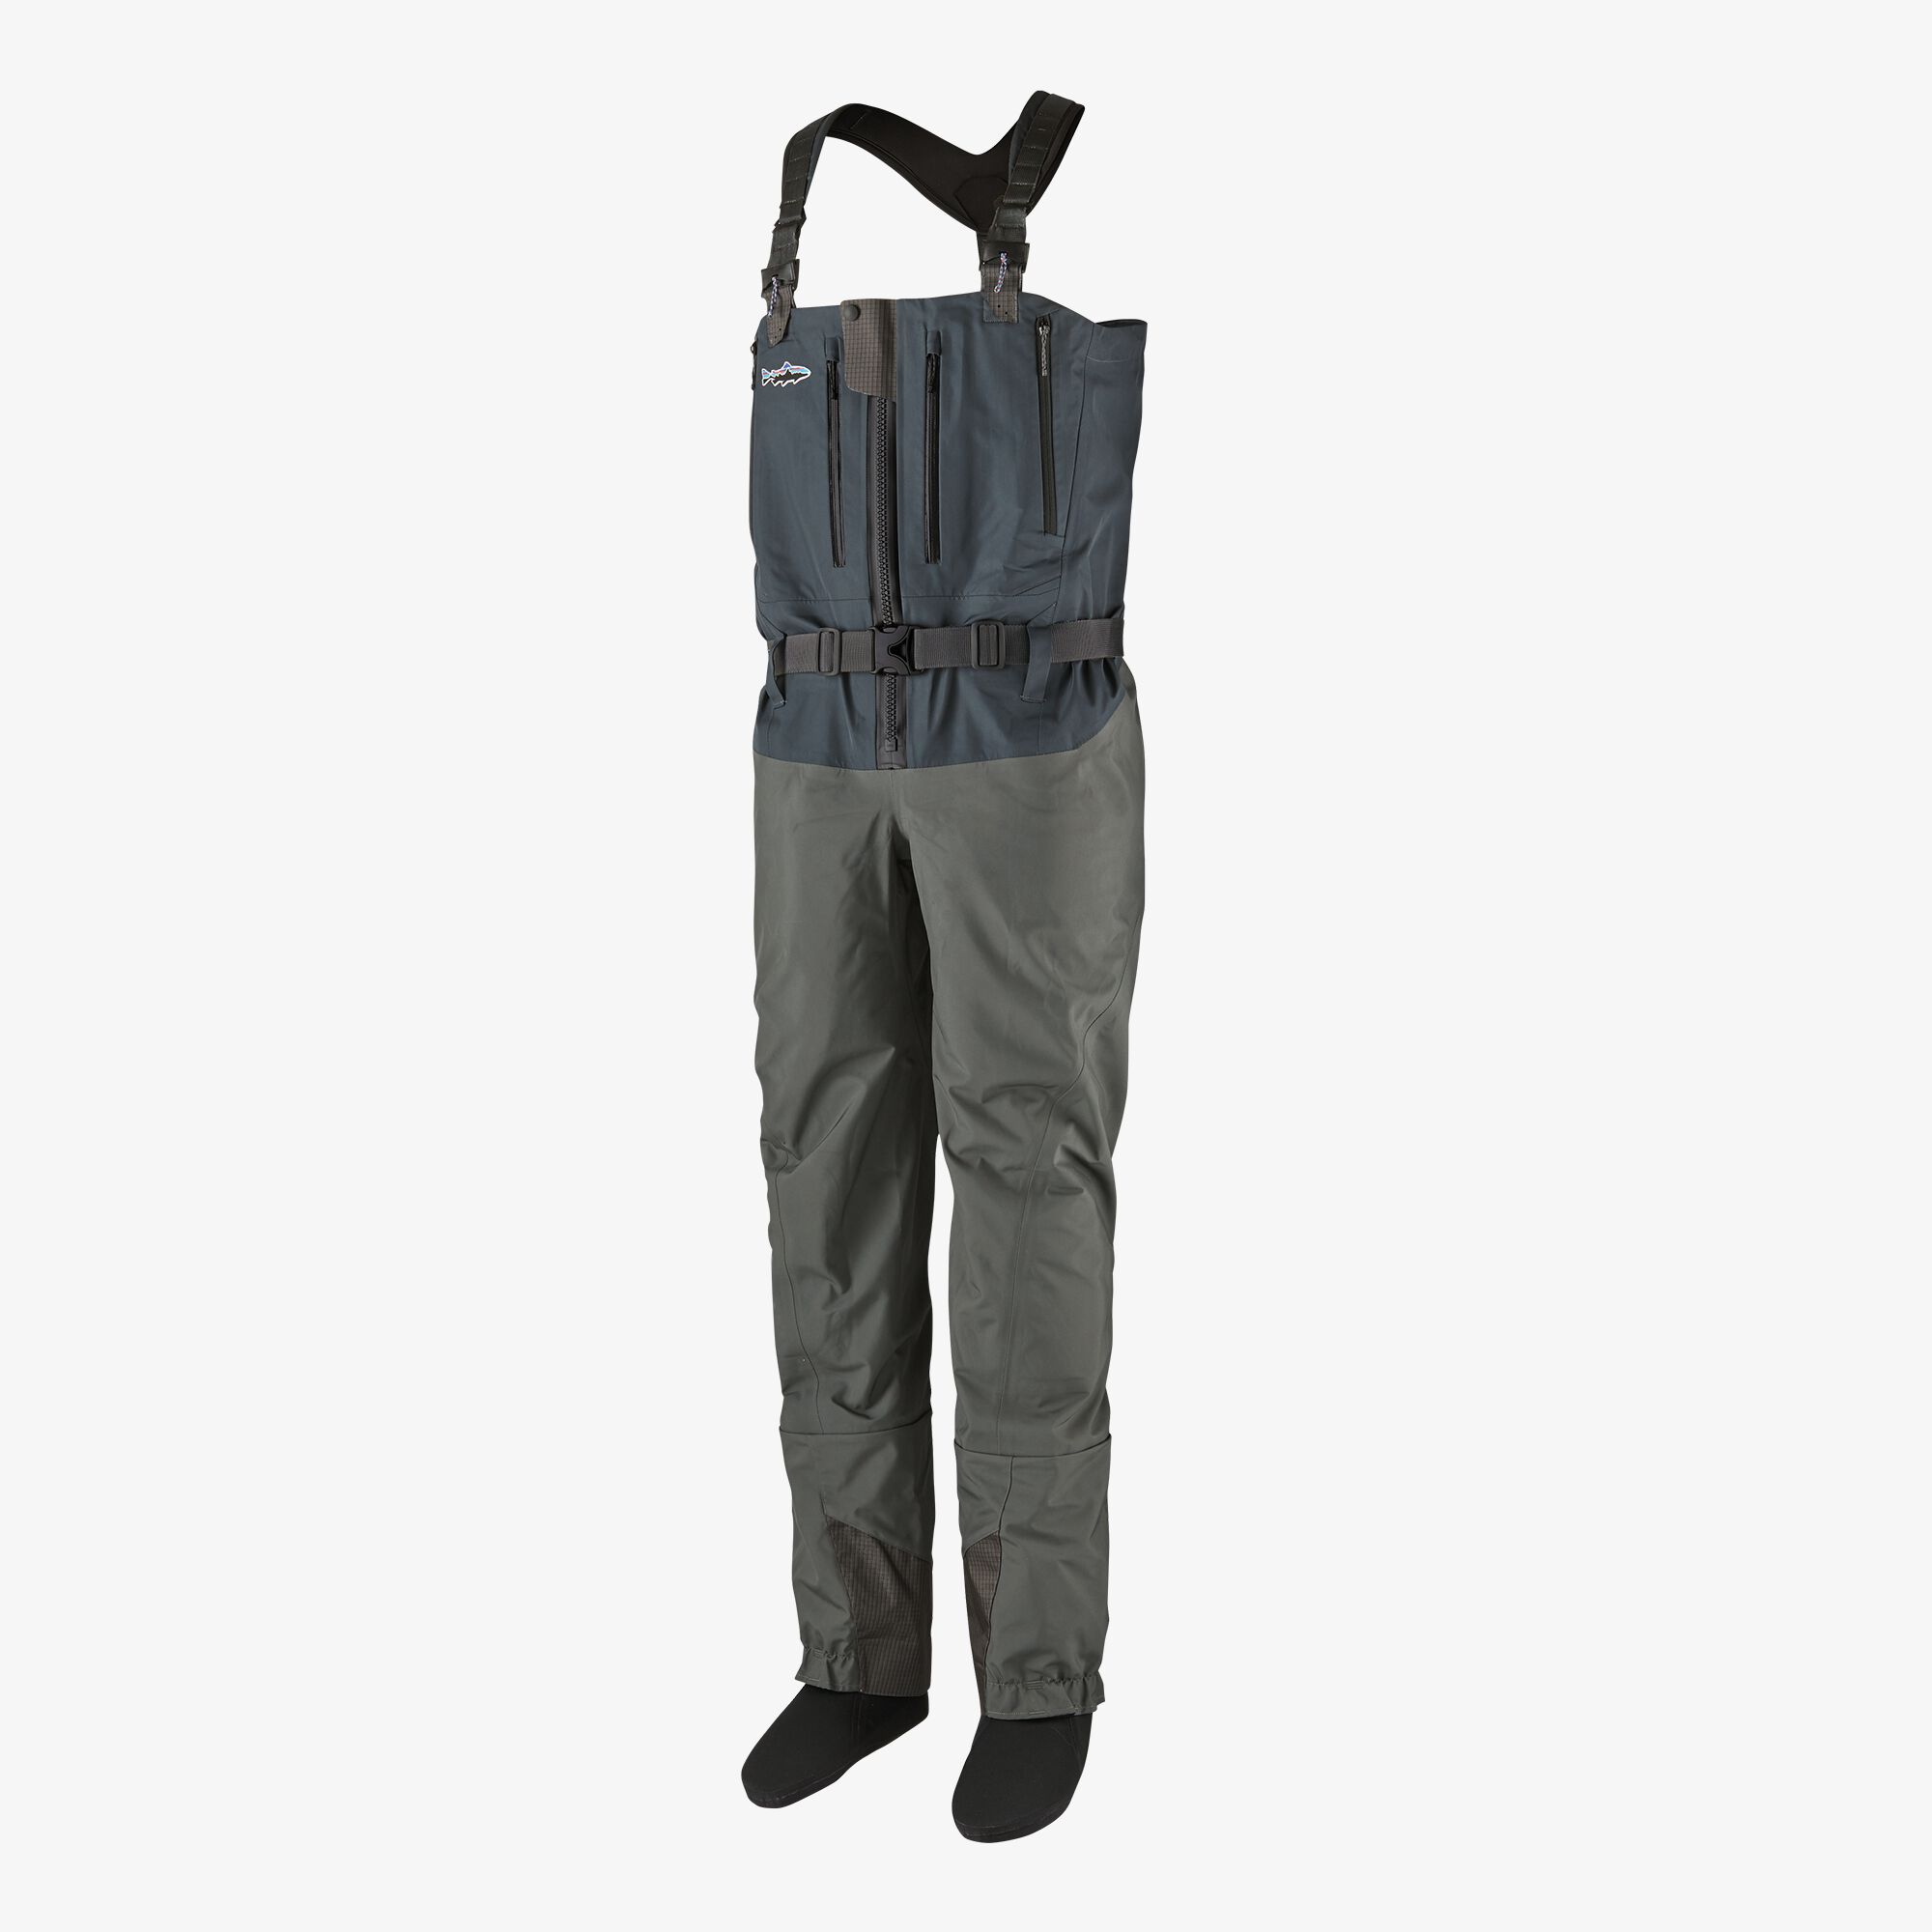 PATAGONIA SWIFTCURRENT EXPEDITION ZIP-FRONT WADER - FORGE GREY - 2RM